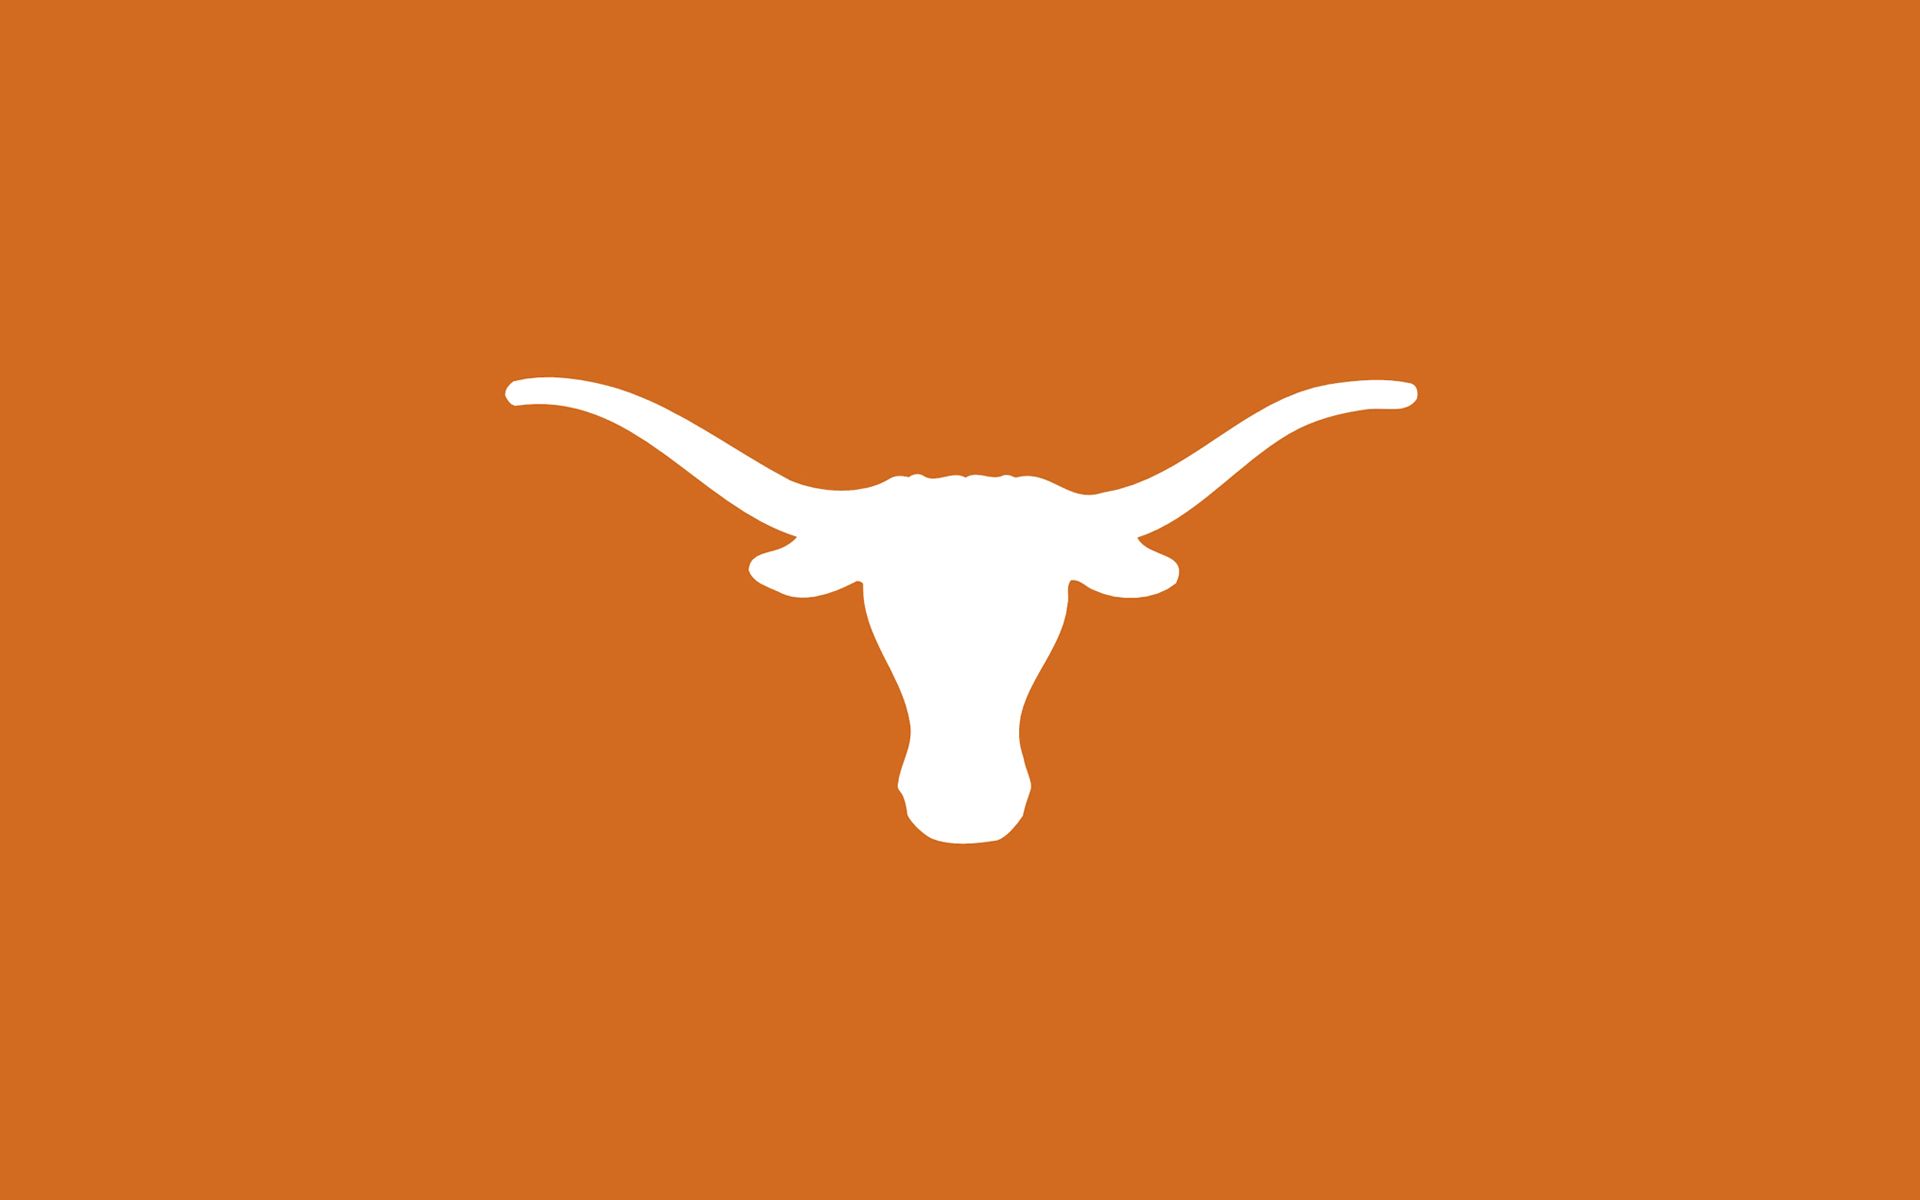 TEXAS Football wallpaper by nathaniel120  Download on ZEDGE  35f1